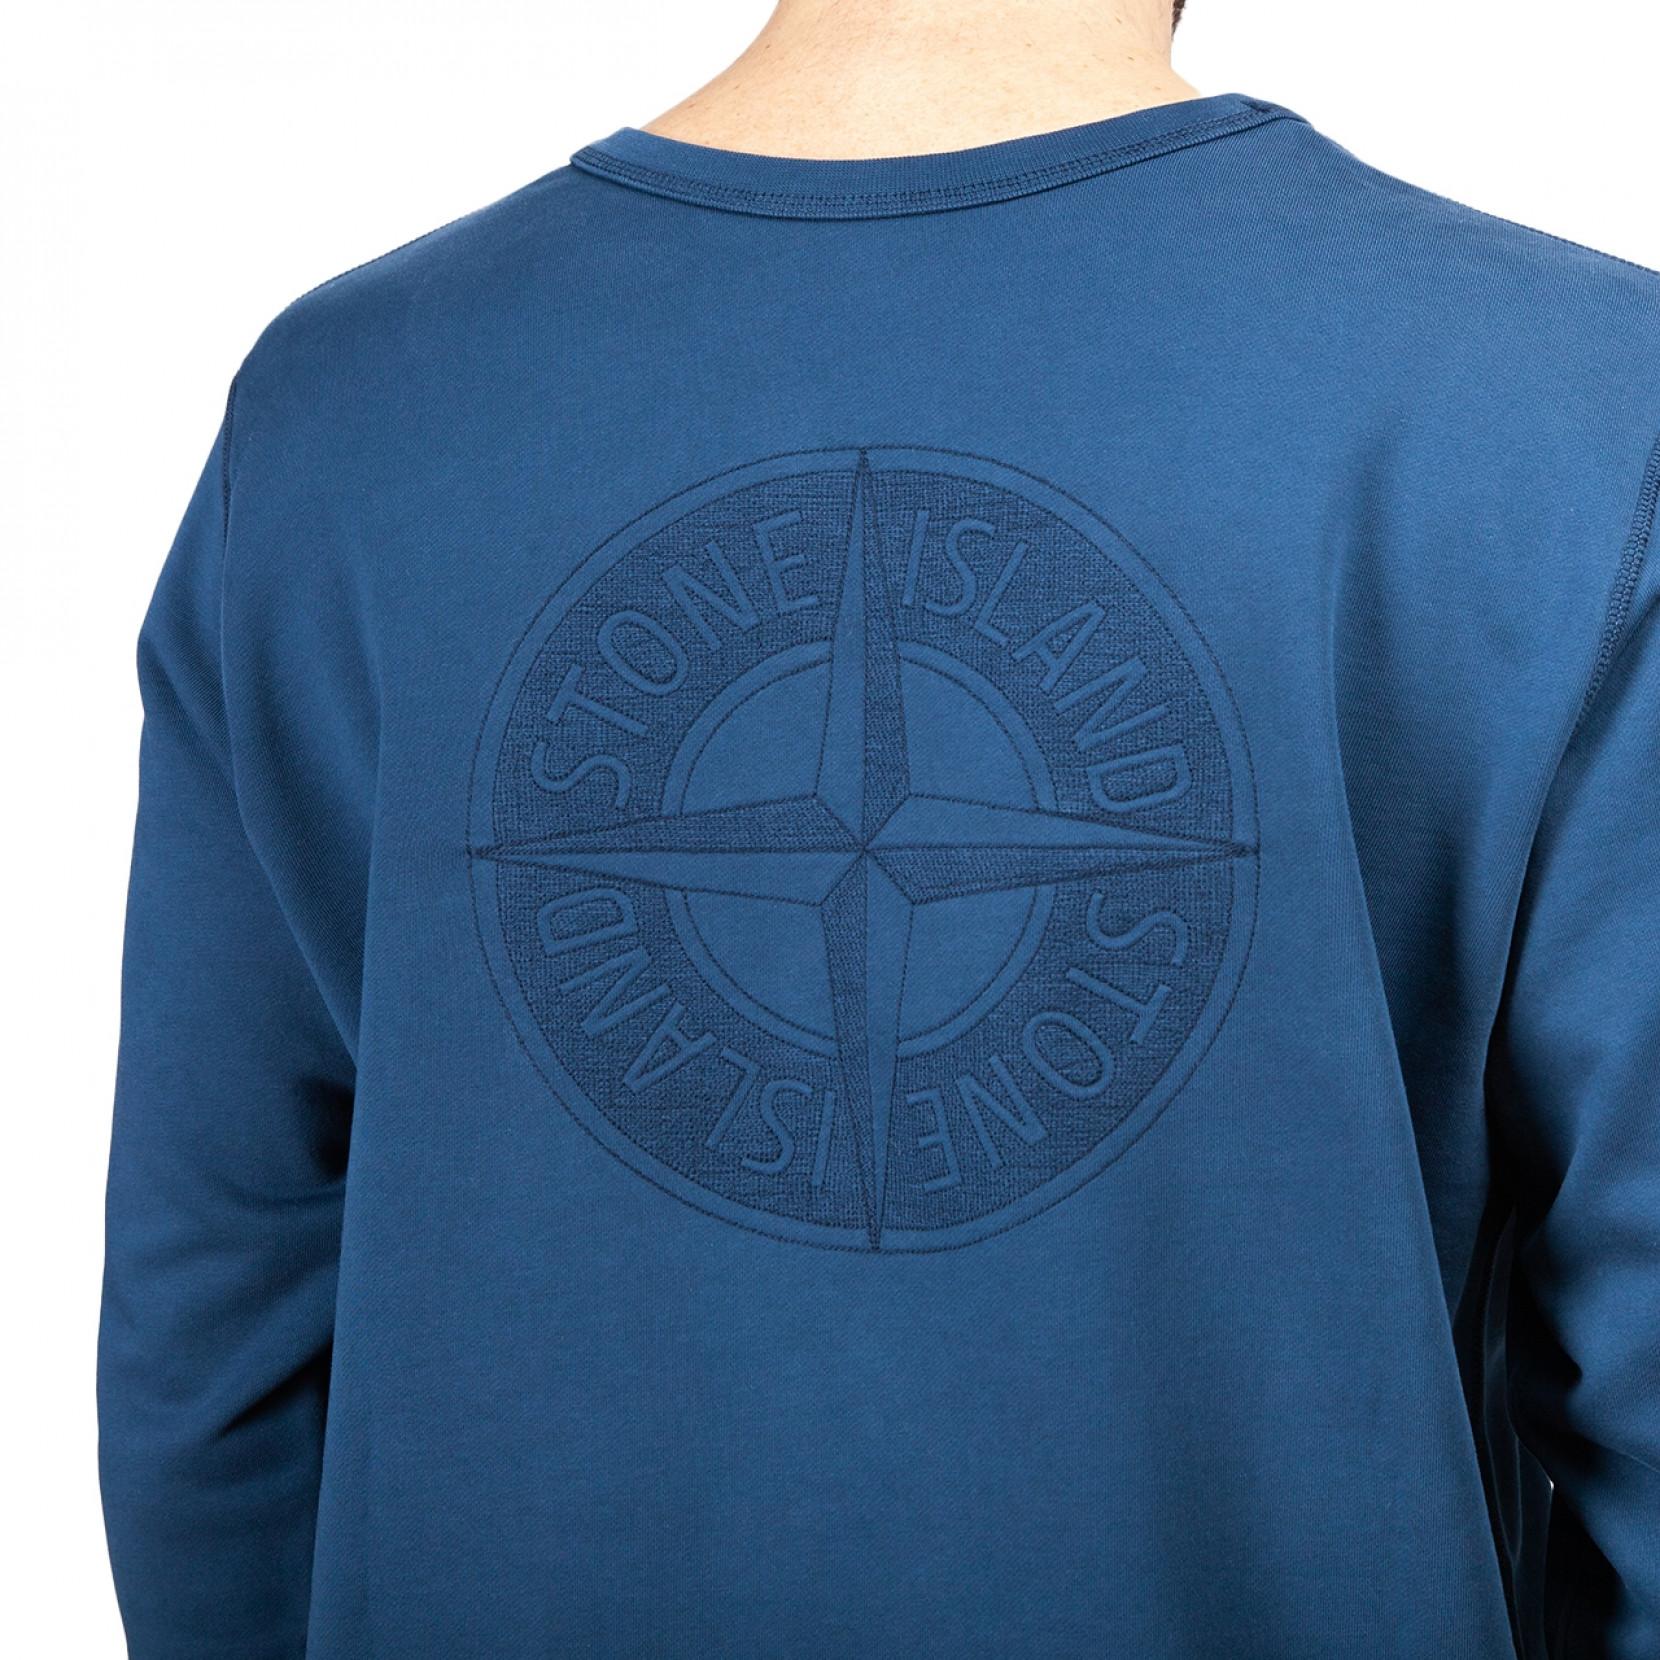 Stone Island Cotton Double Front Crewneck in Navy (Blue) for Men - Lyst